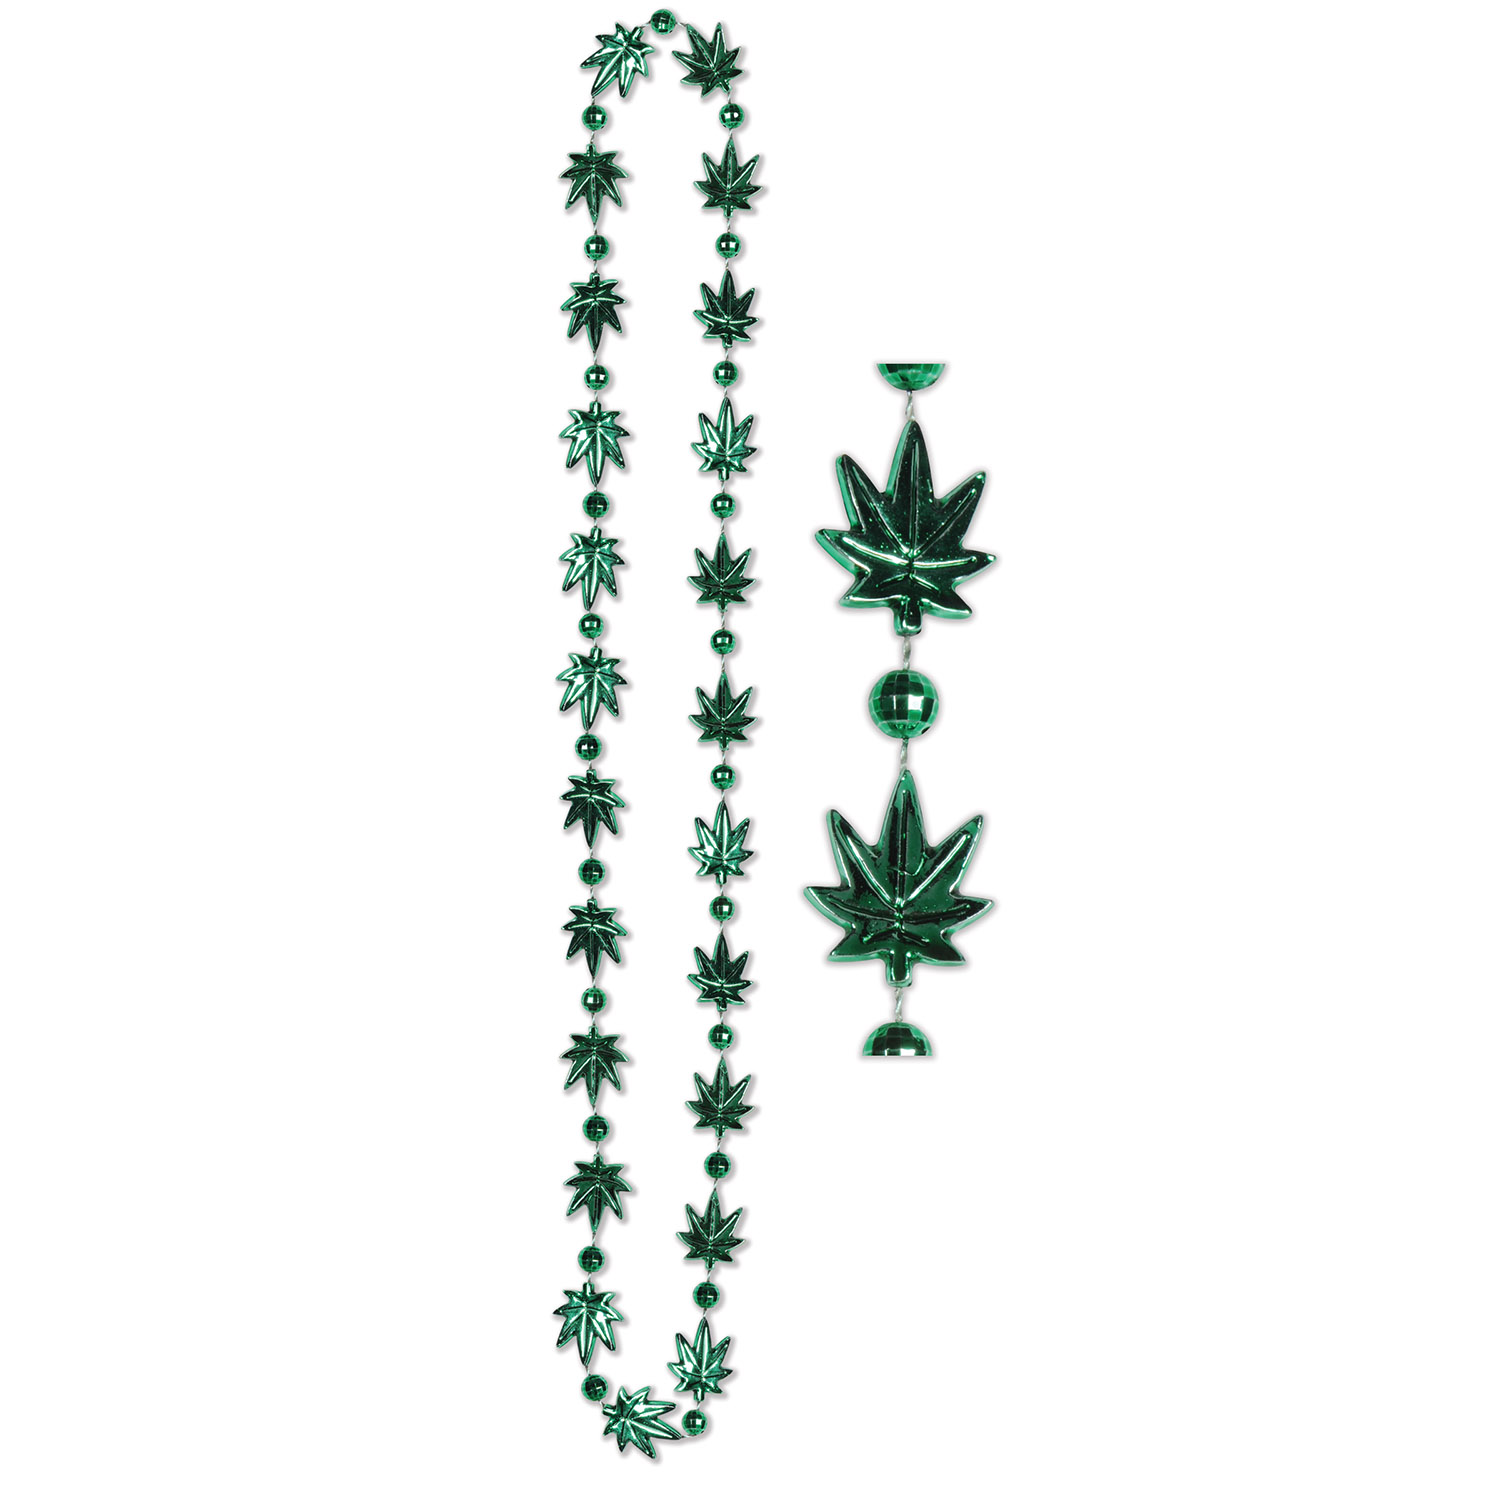 Weed BEADS